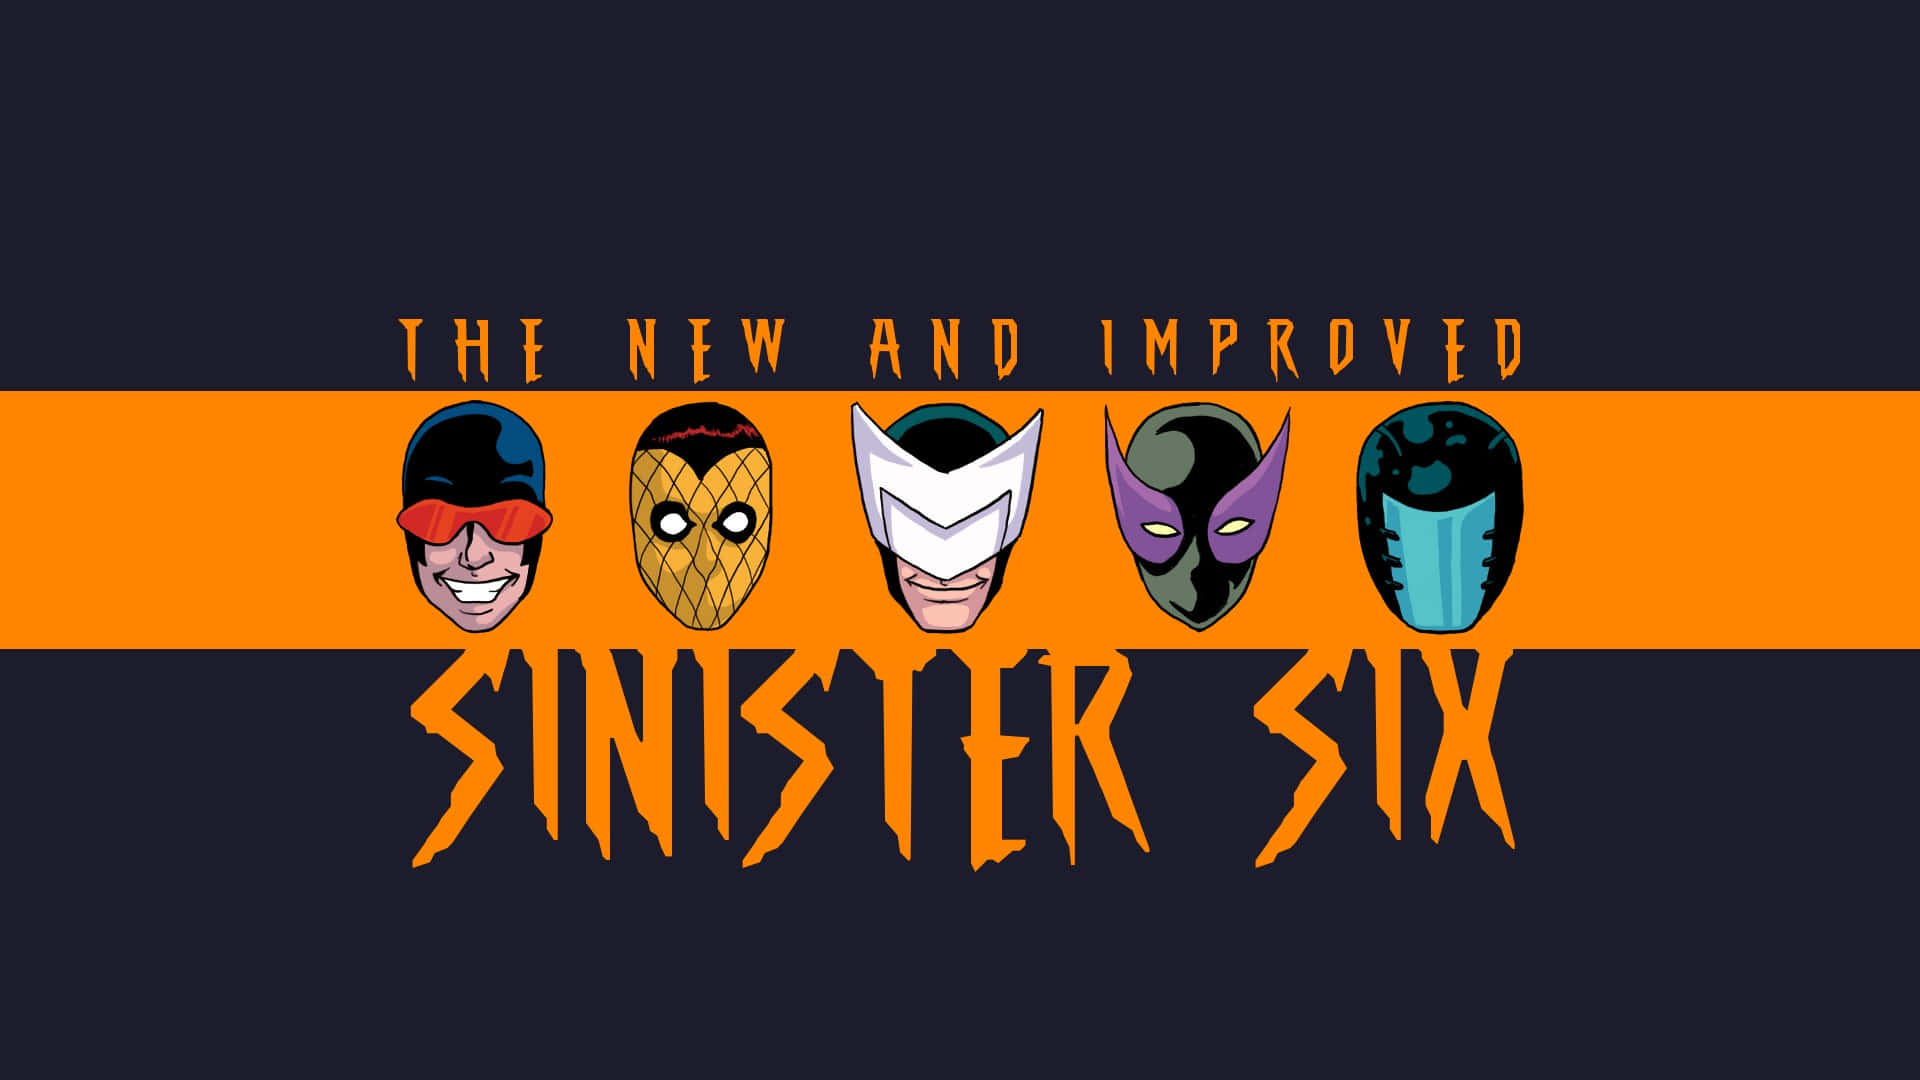 Caption: Sinister Six menacingly standing together ready for action. Wallpaper